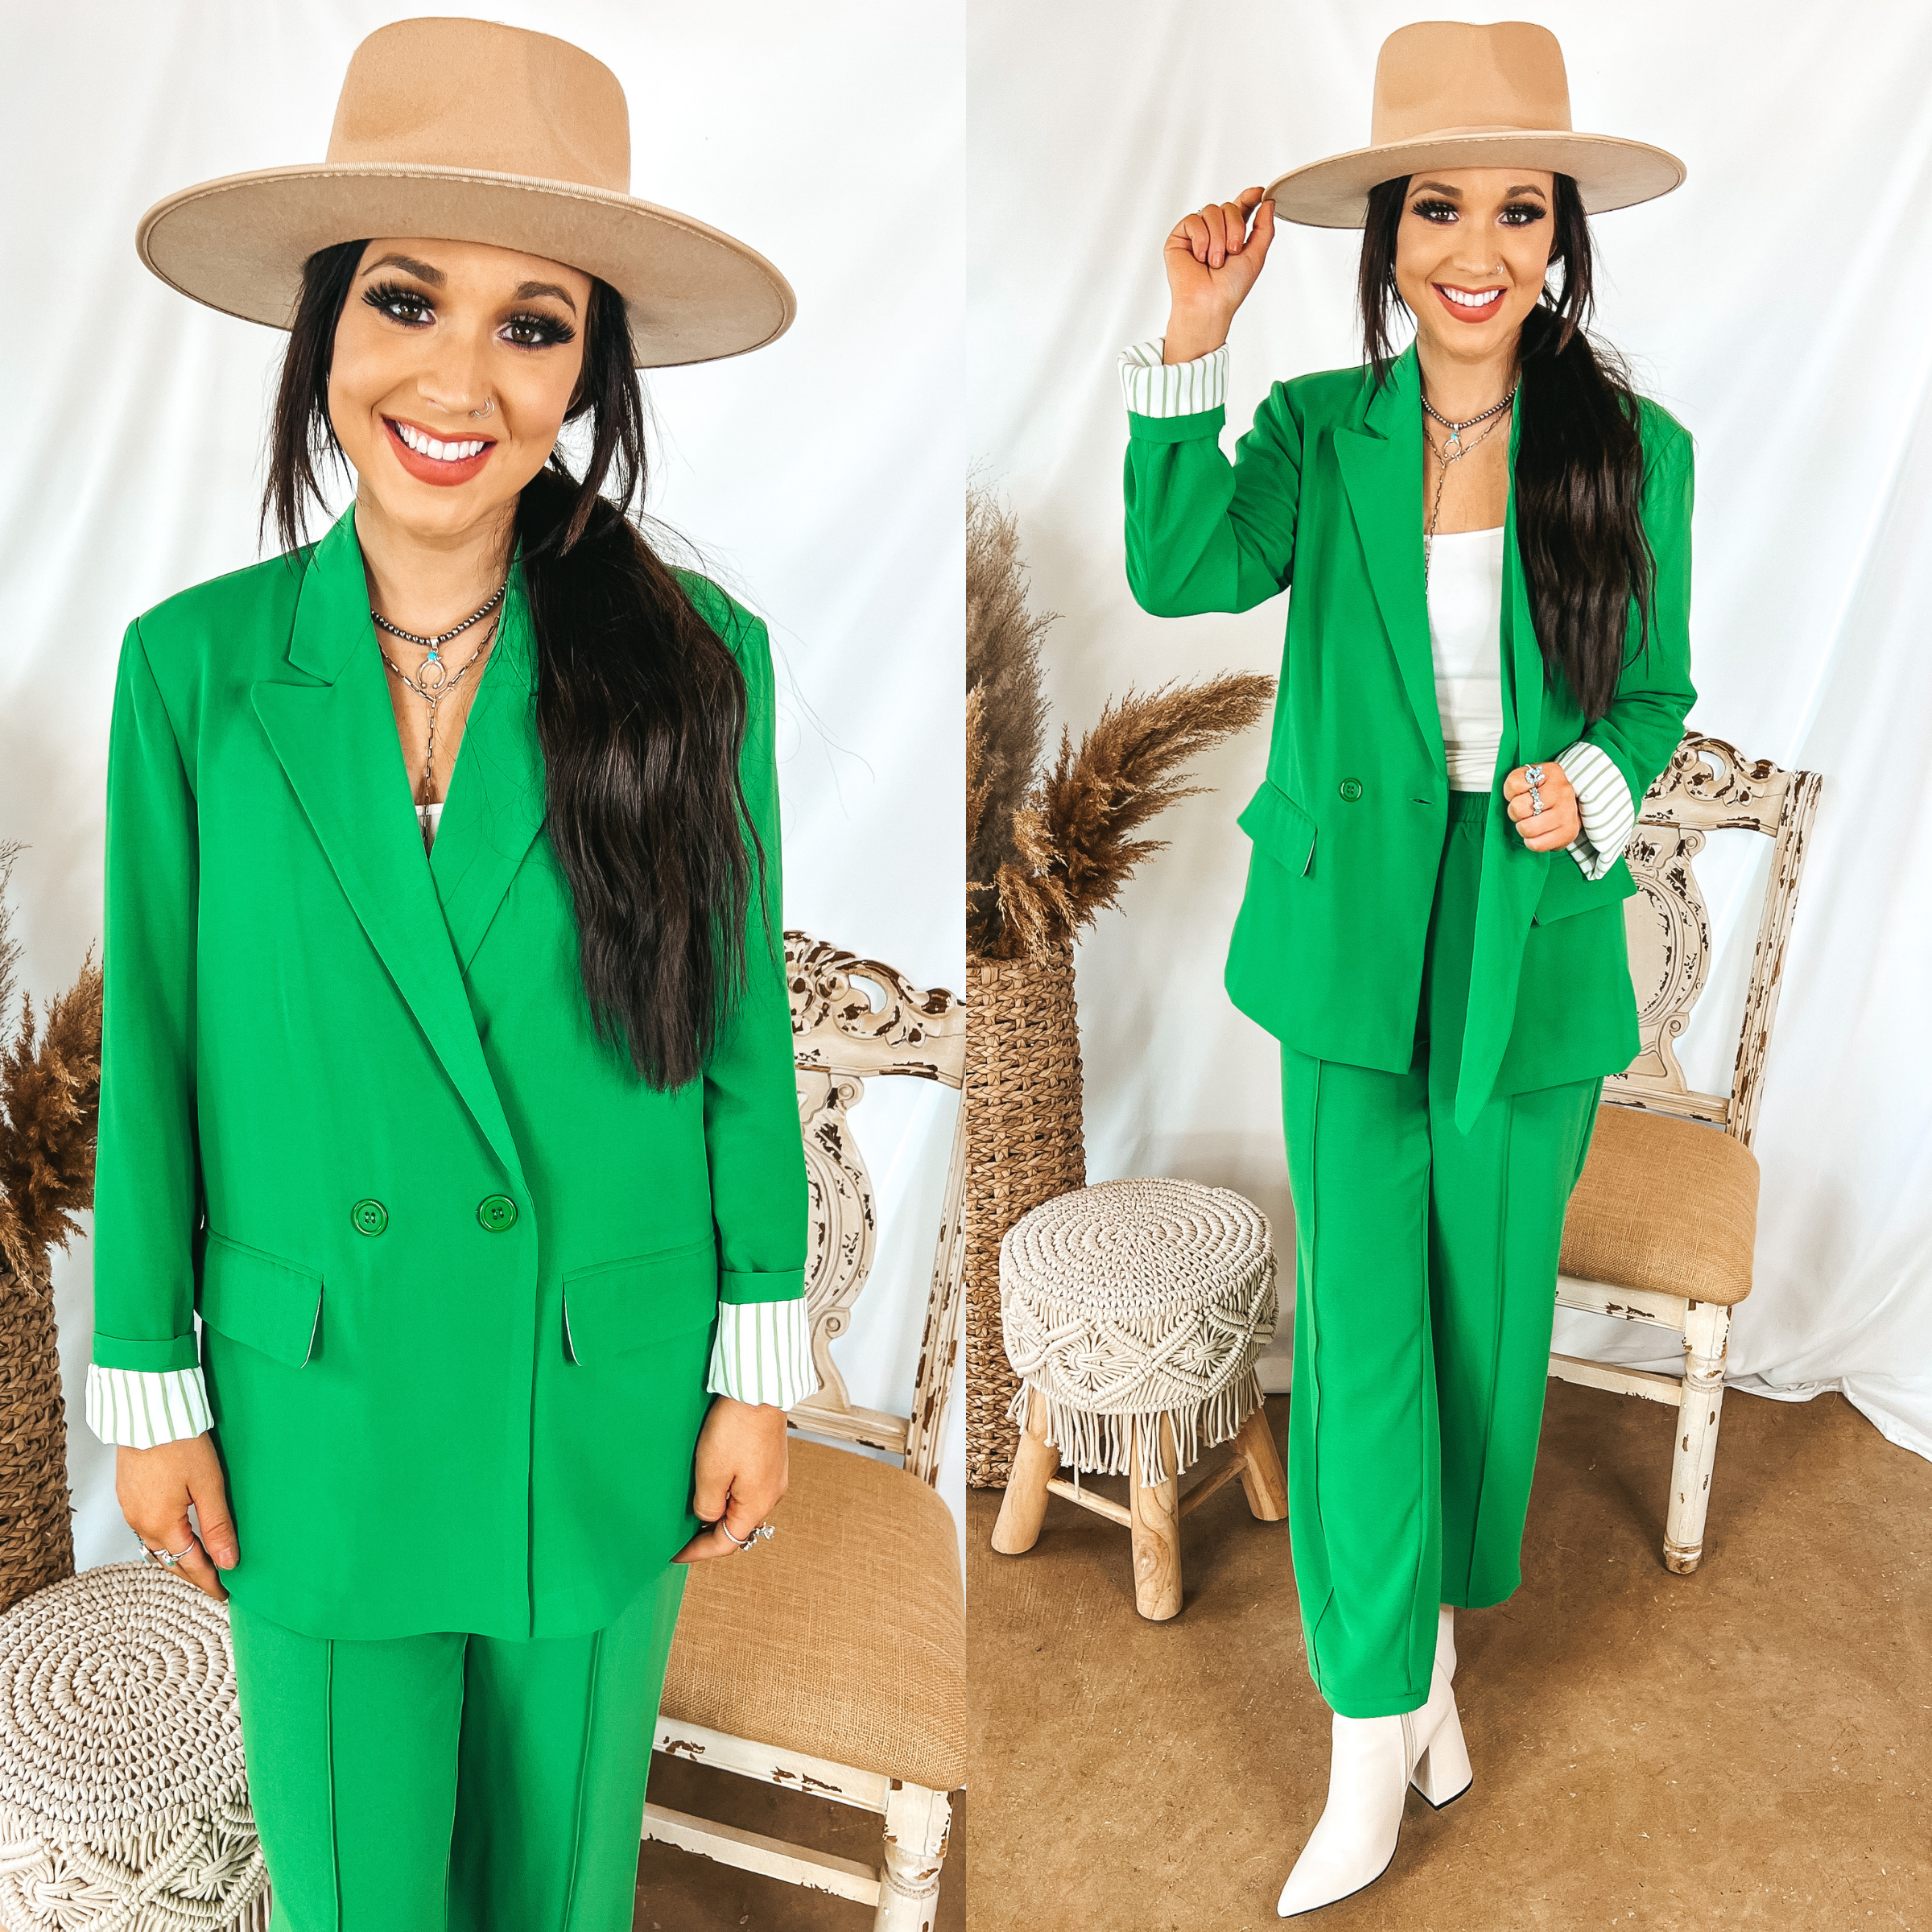 Model is wearing a green blazer set with a white top underneath. Model has it paired with white booties, tan hat, and silver jewelry.